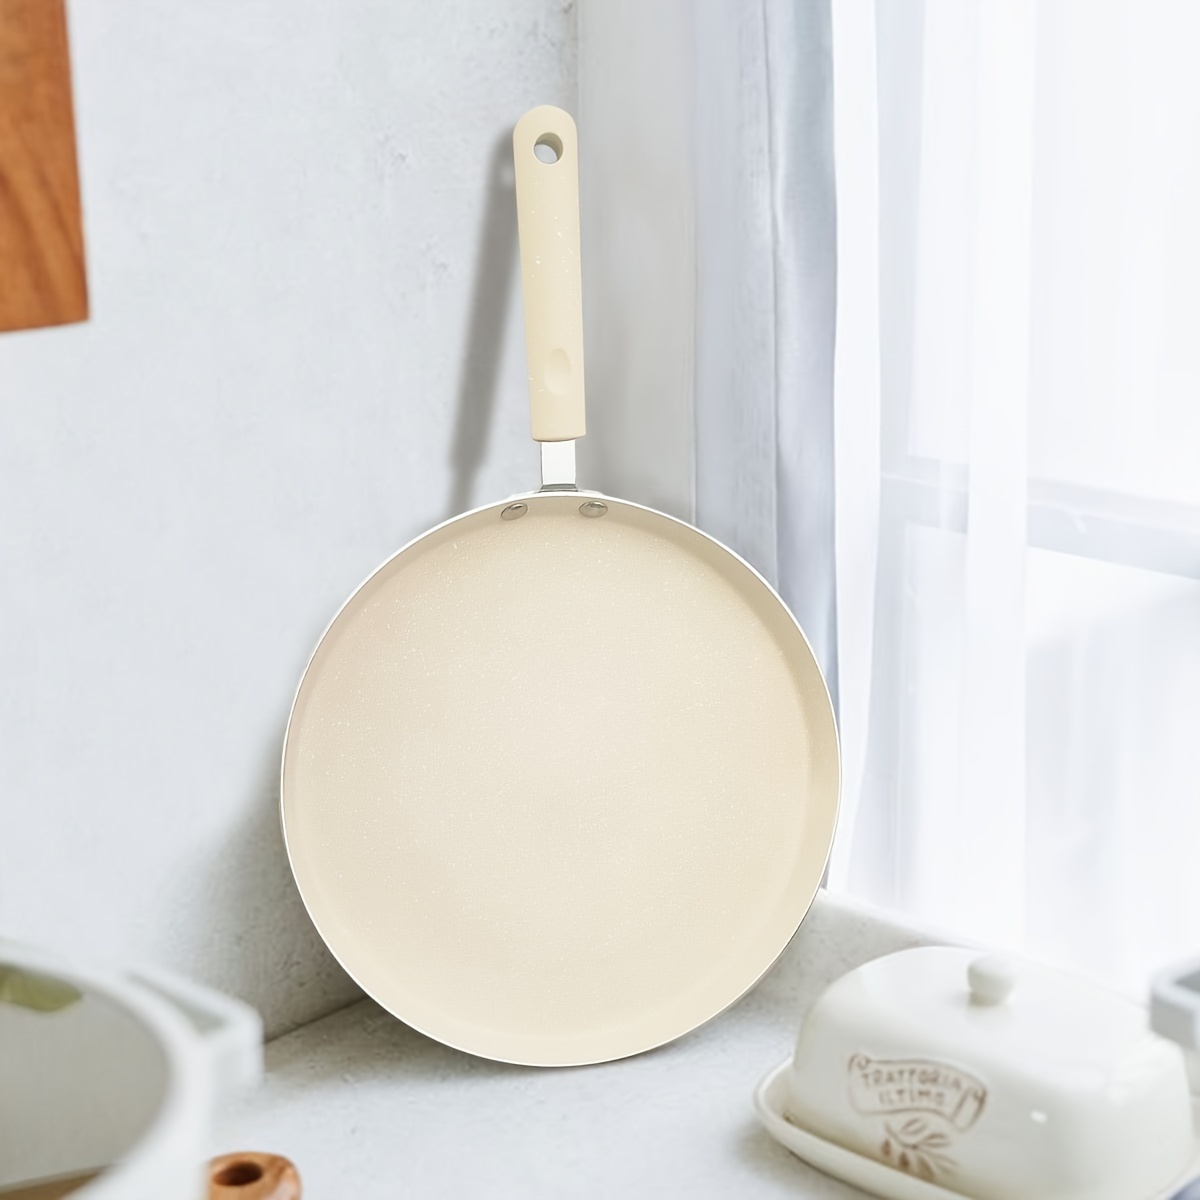 

Beige Maifan Stone Nonstick Crepe Pan Set With Wooden Handle - Dishwasher Safe Aluminum Pancake Skillet For Electric Coil, Gas Stove, And Induction Cooktop Use - No Electricity Required